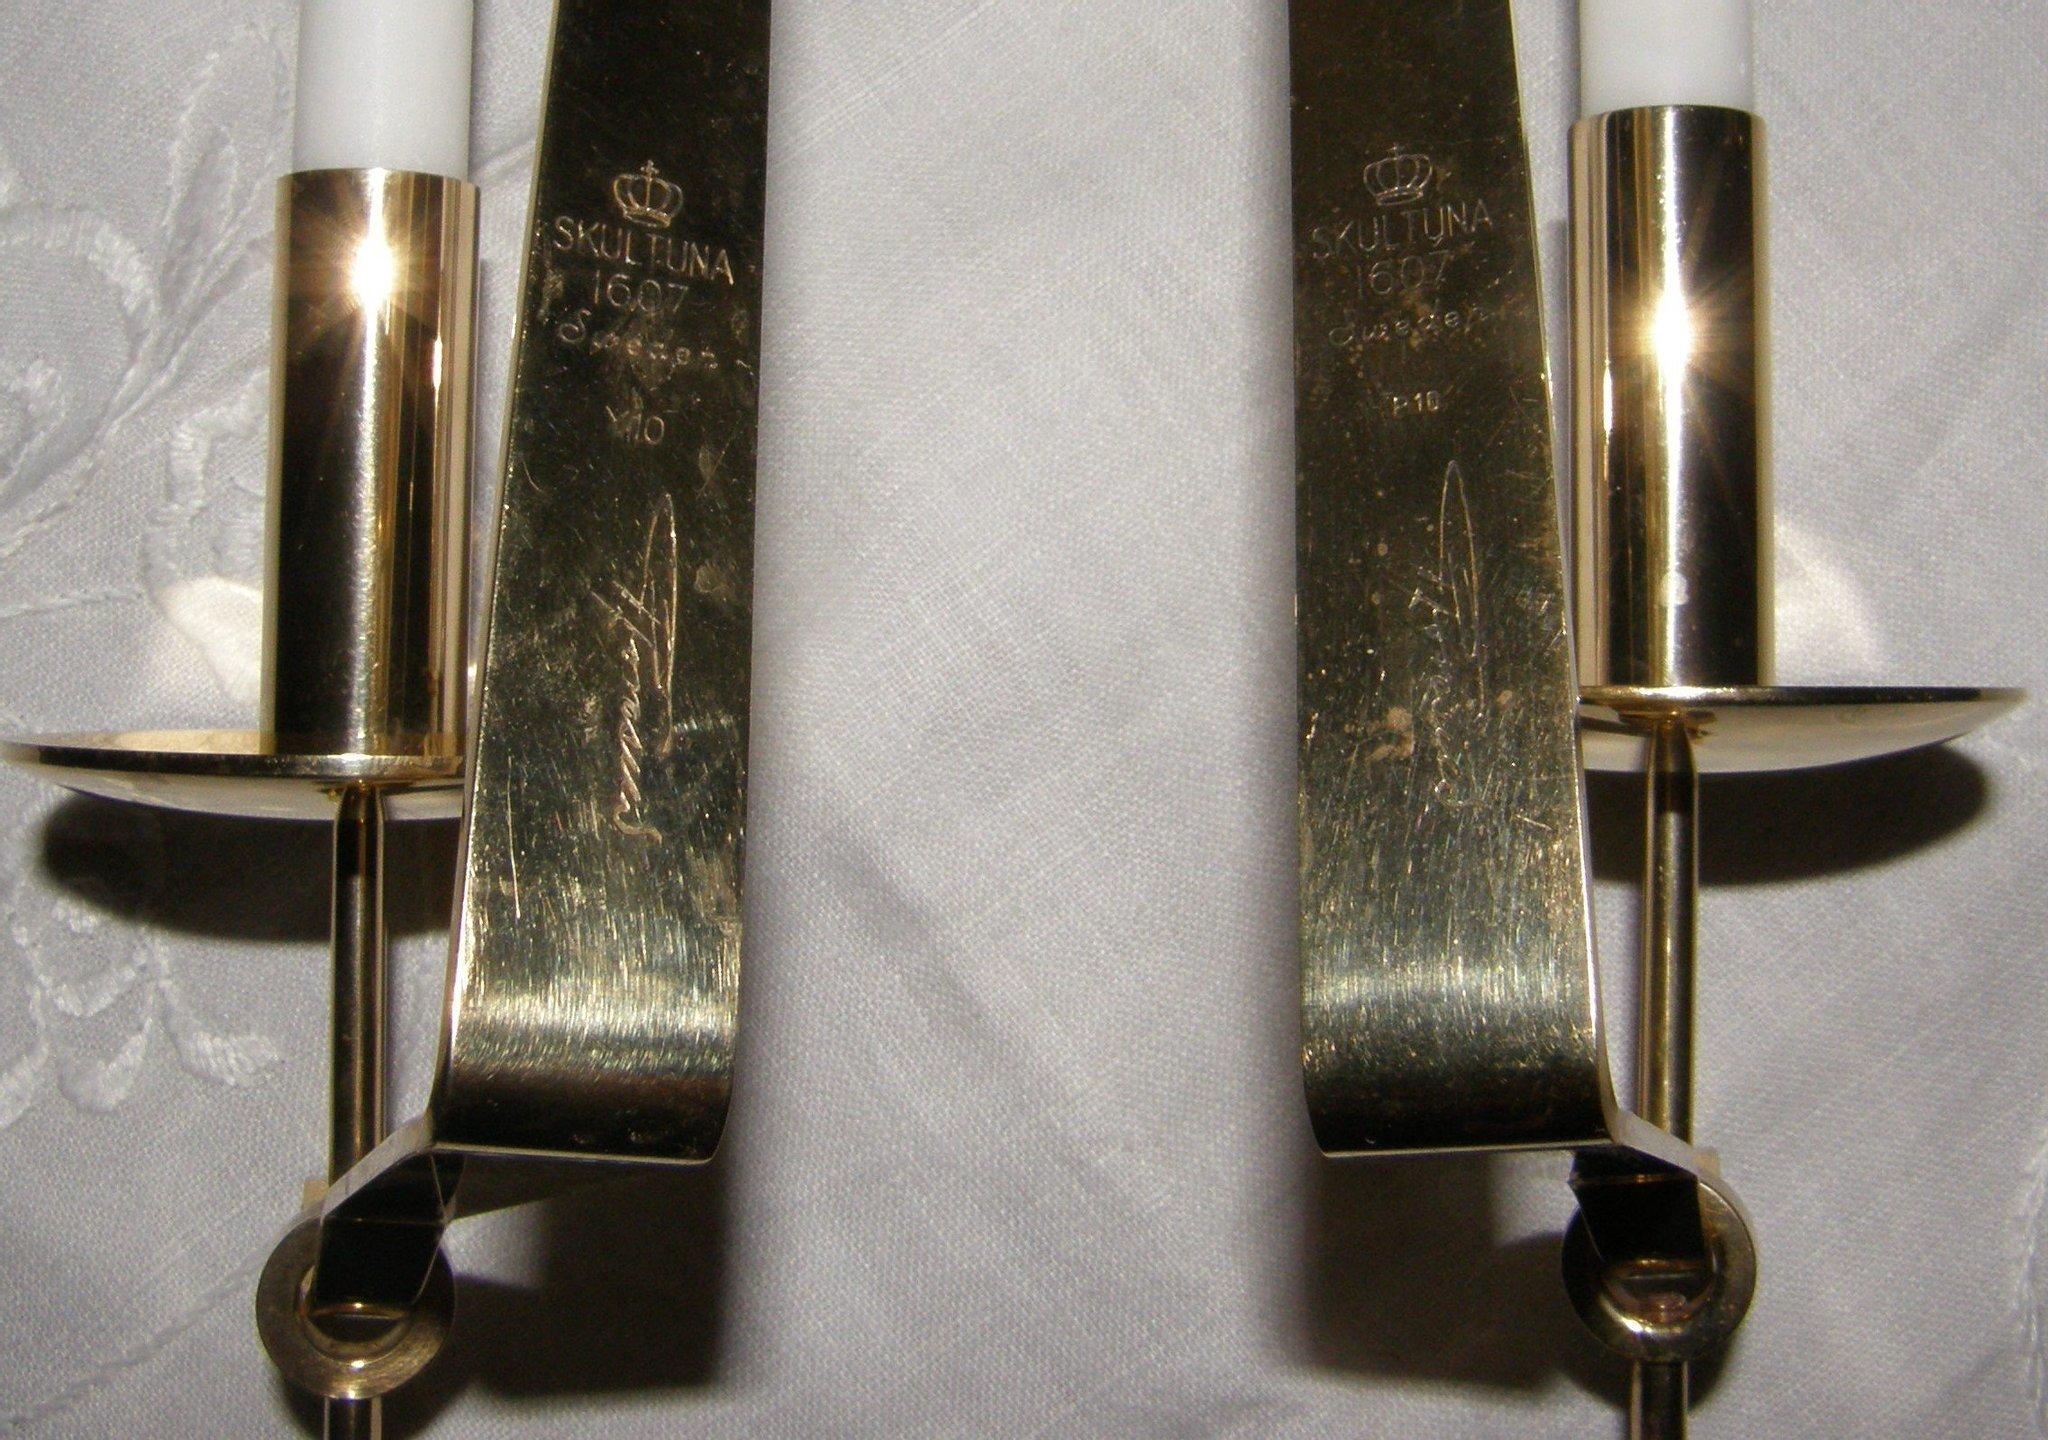 Up for sale two lovely sconces from Skultuna, Sweden in brass. 
Designed by Pierre Forsell and manufactured in the 1960s. 
Both sconces are signed.
Very good vintage condition.